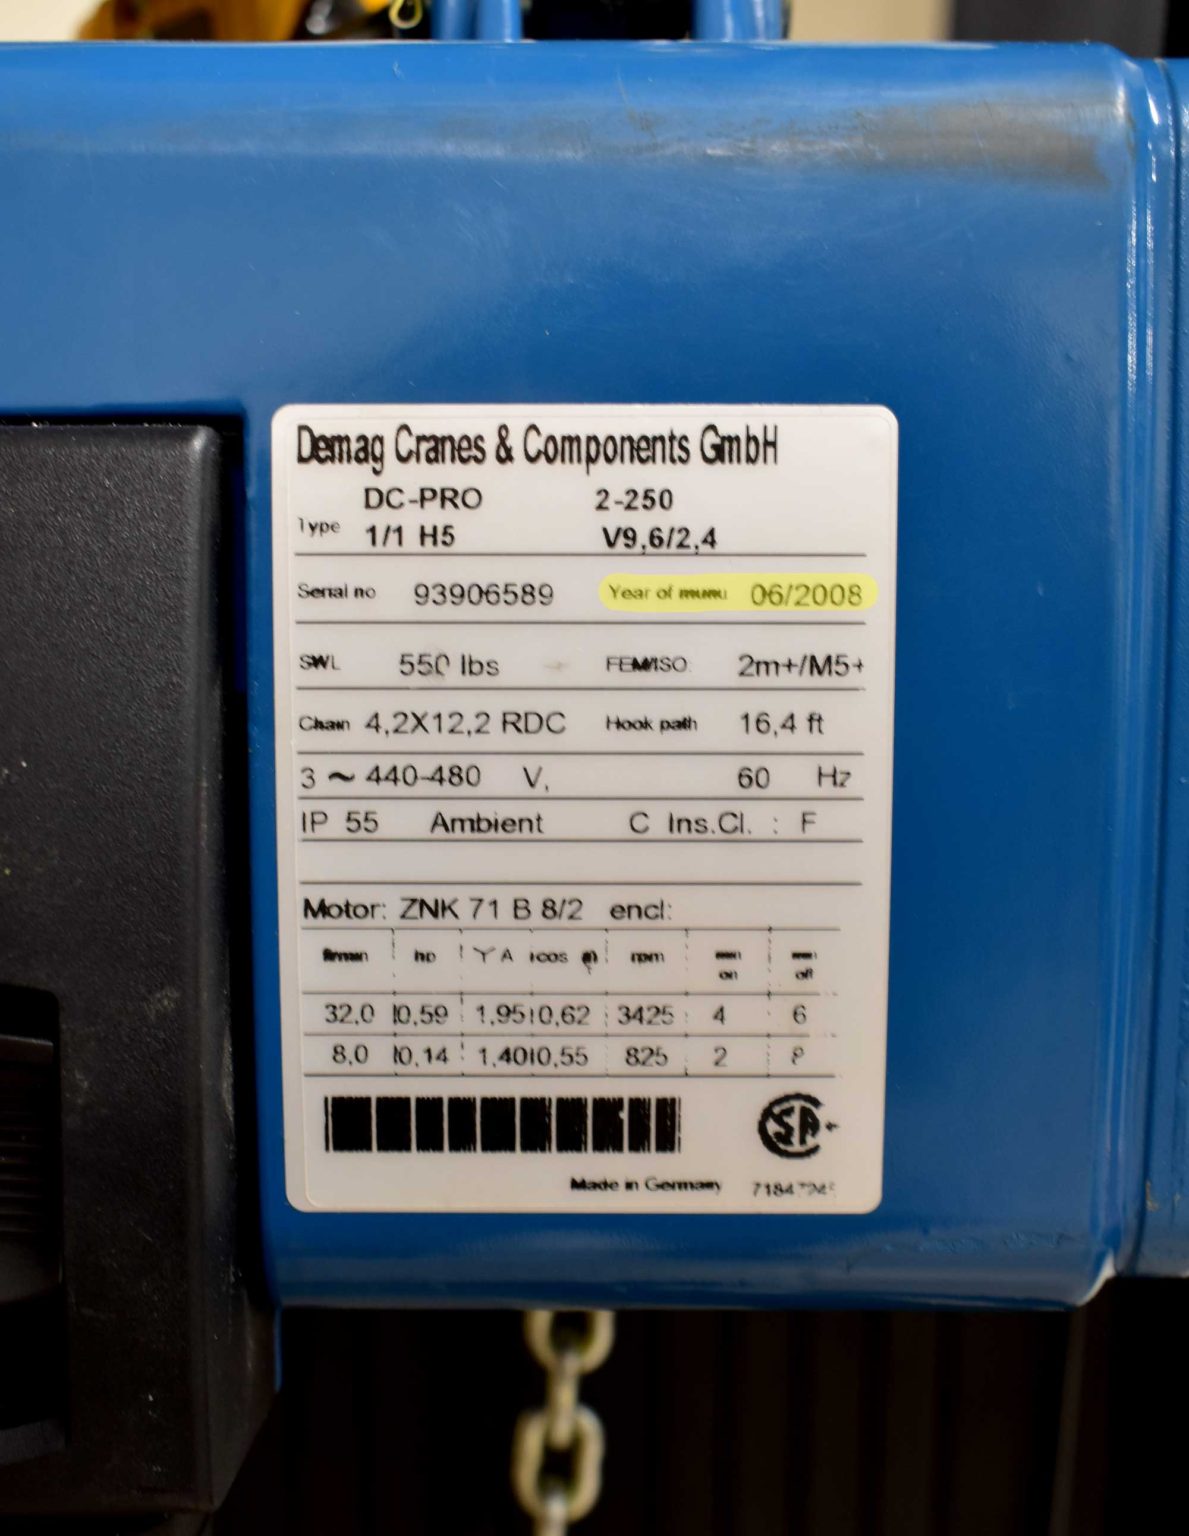 Hoist Info Needed for Parts & Troubleshooting | Demag Cranes